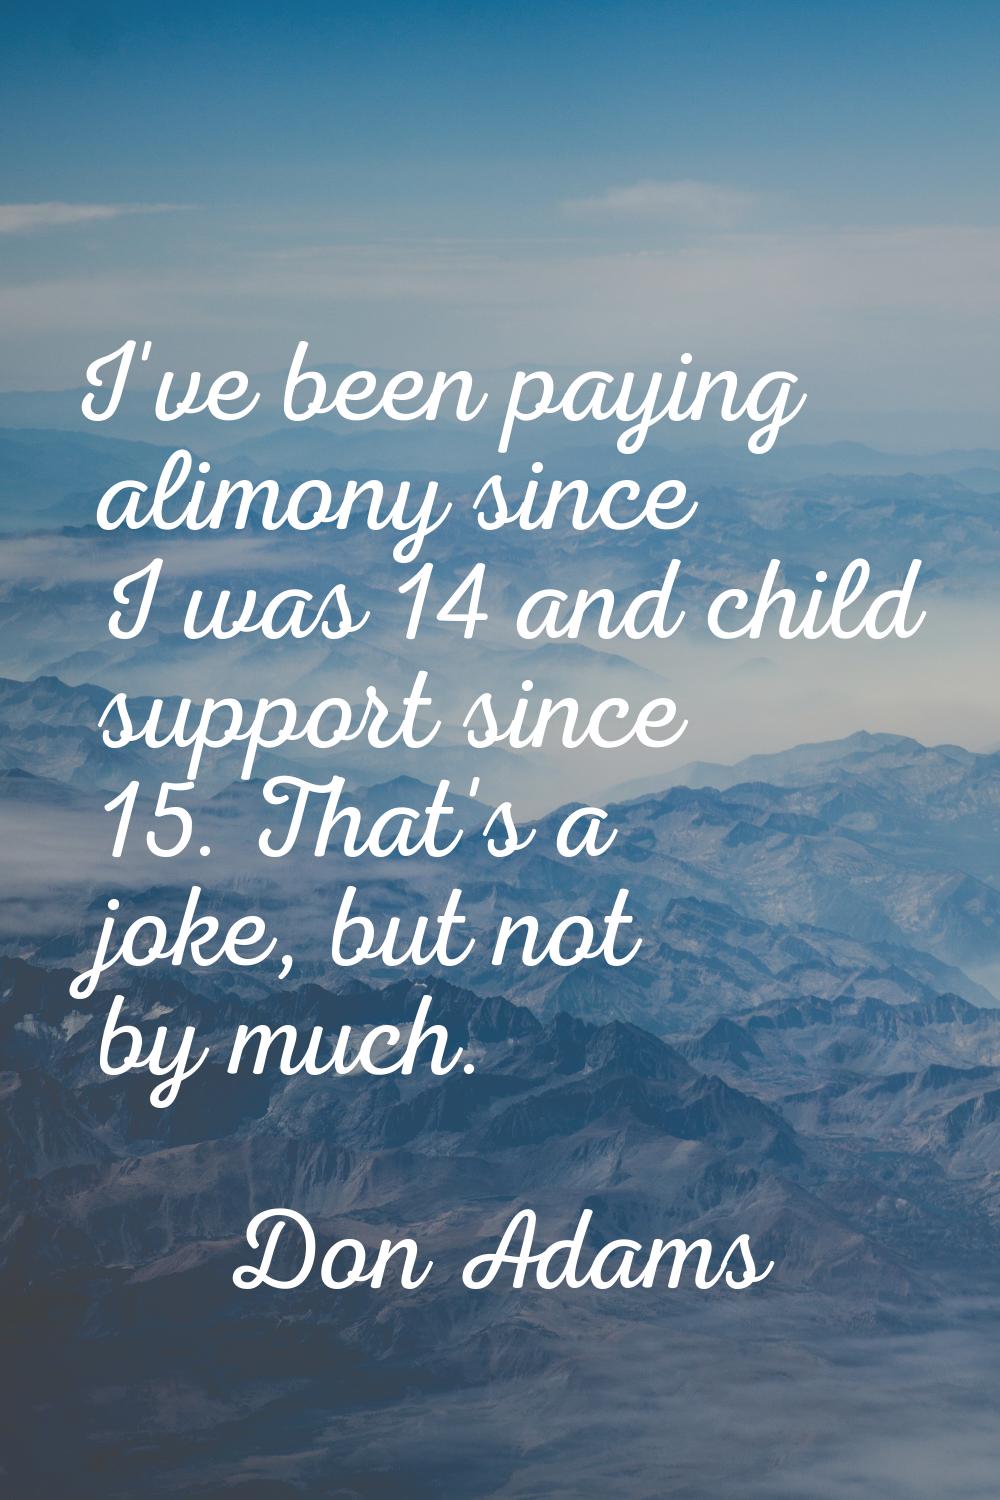 I've been paying alimony since I was 14 and child support since 15. That's a joke, but not by much.